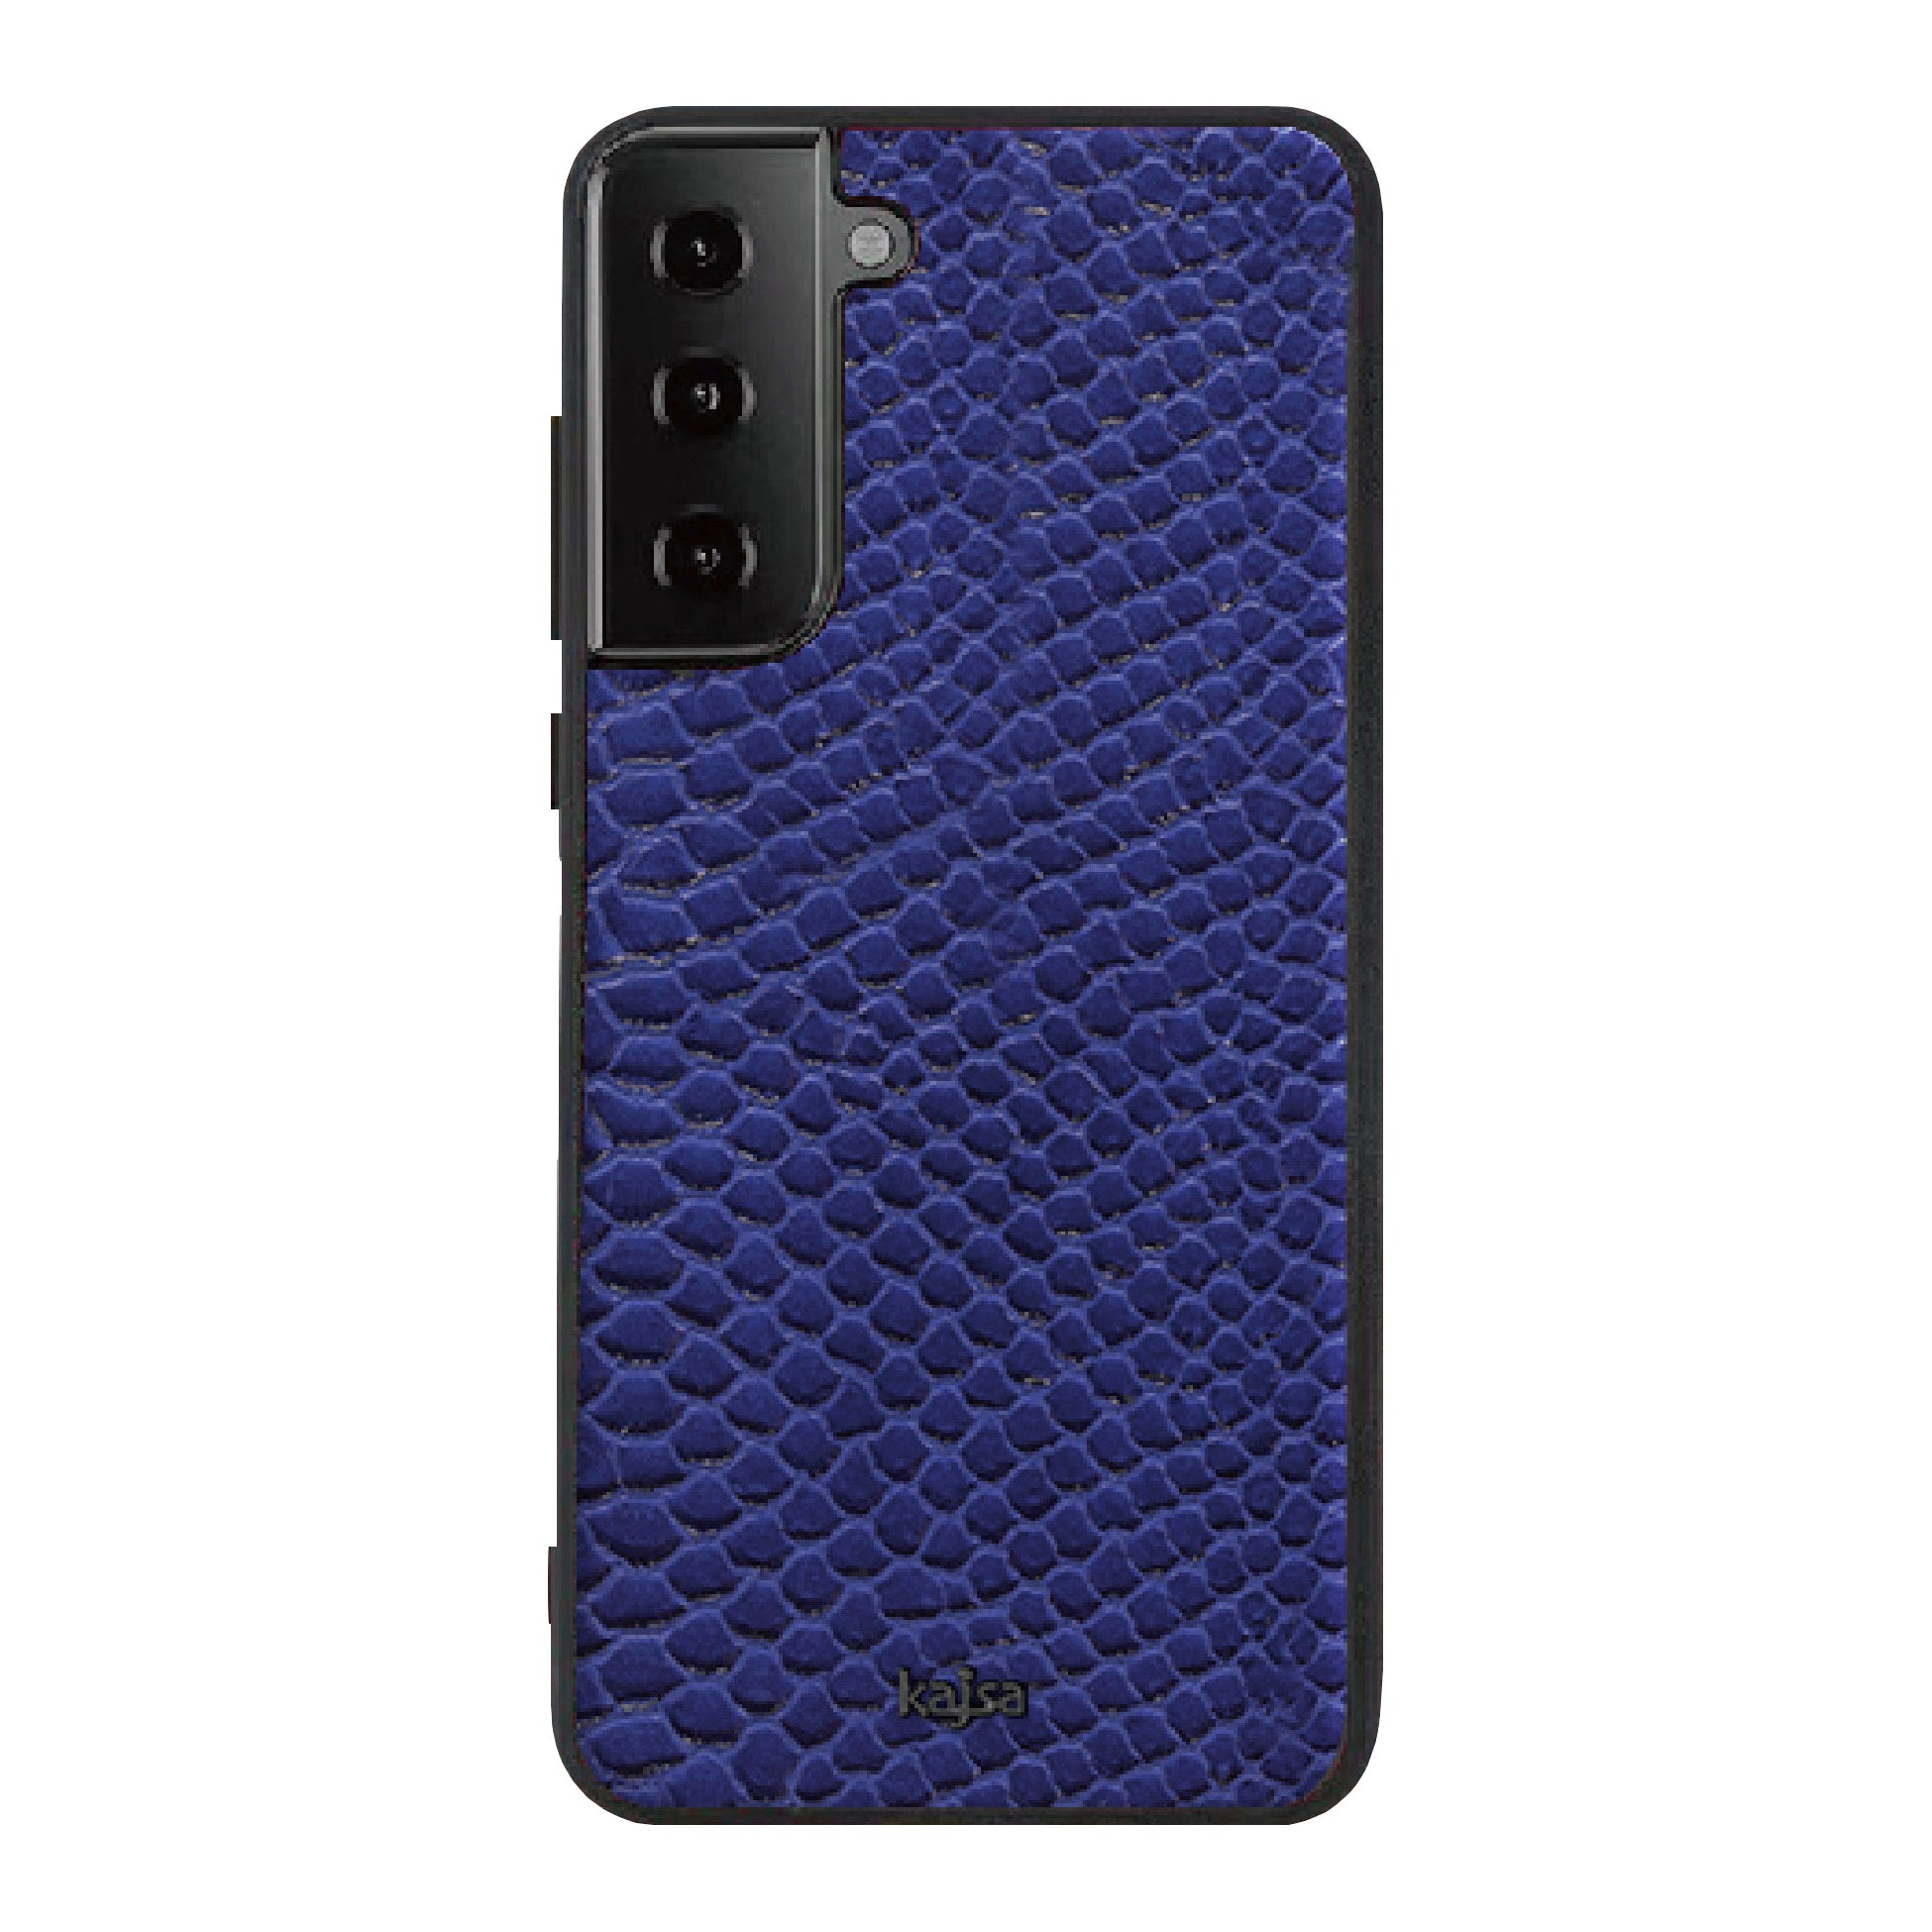 Glamorous Collection - Snake Pattern Back Case for Samsung Galaxy S21/S21+/S21 Ultra-Phone Case- phone case - phone cases- phone cover- iphone cover- iphone case- iphone cases- leather case- leather cases- DIYCASE - custom case - leather cover - hand strap case - croco pattern case - snake pattern case - carbon fiber phone case - phone case brand - unique phone case - high quality - phone case brand - protective case - buy phone case hong kong - online buy phone case - iphone‎手機殼 - 客製化手機殼 - samsung ‎手機殼 - 香